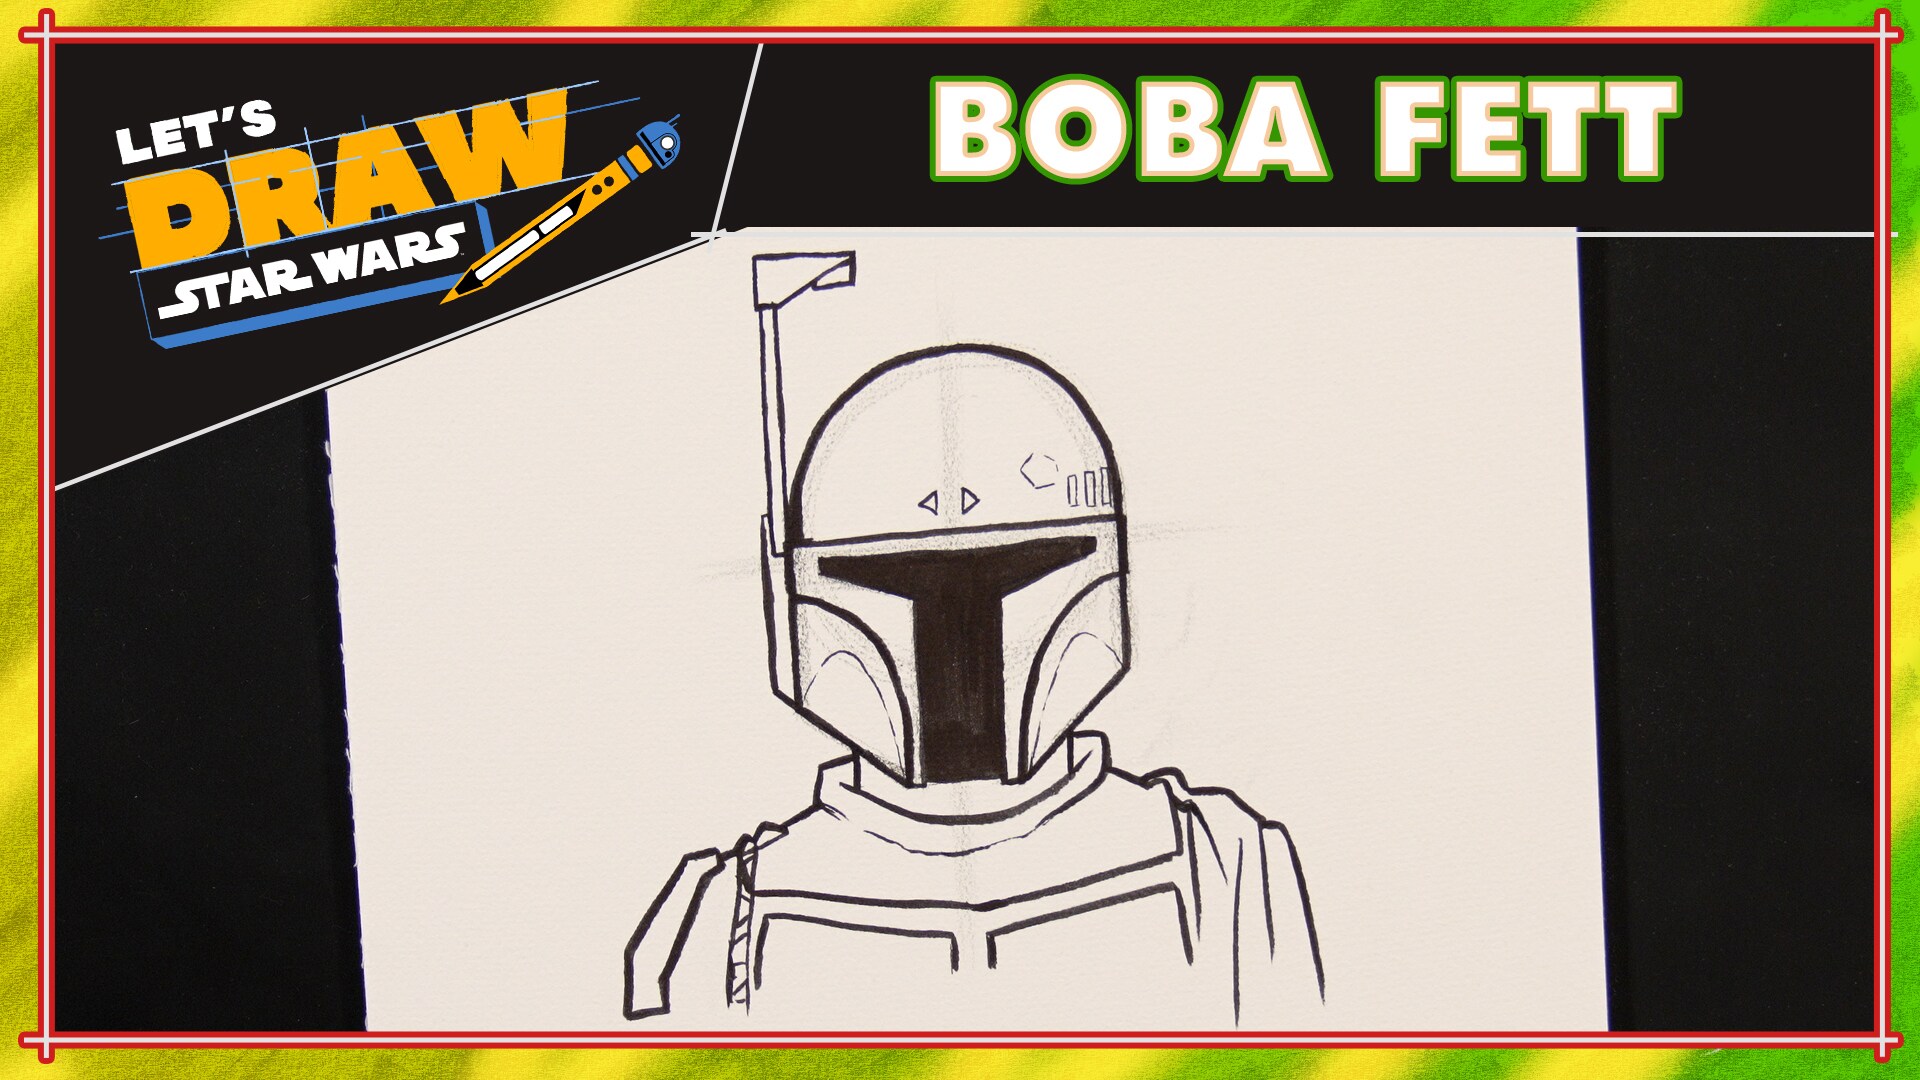 How to Draw Boba Fett | Let's Draw Star Wars